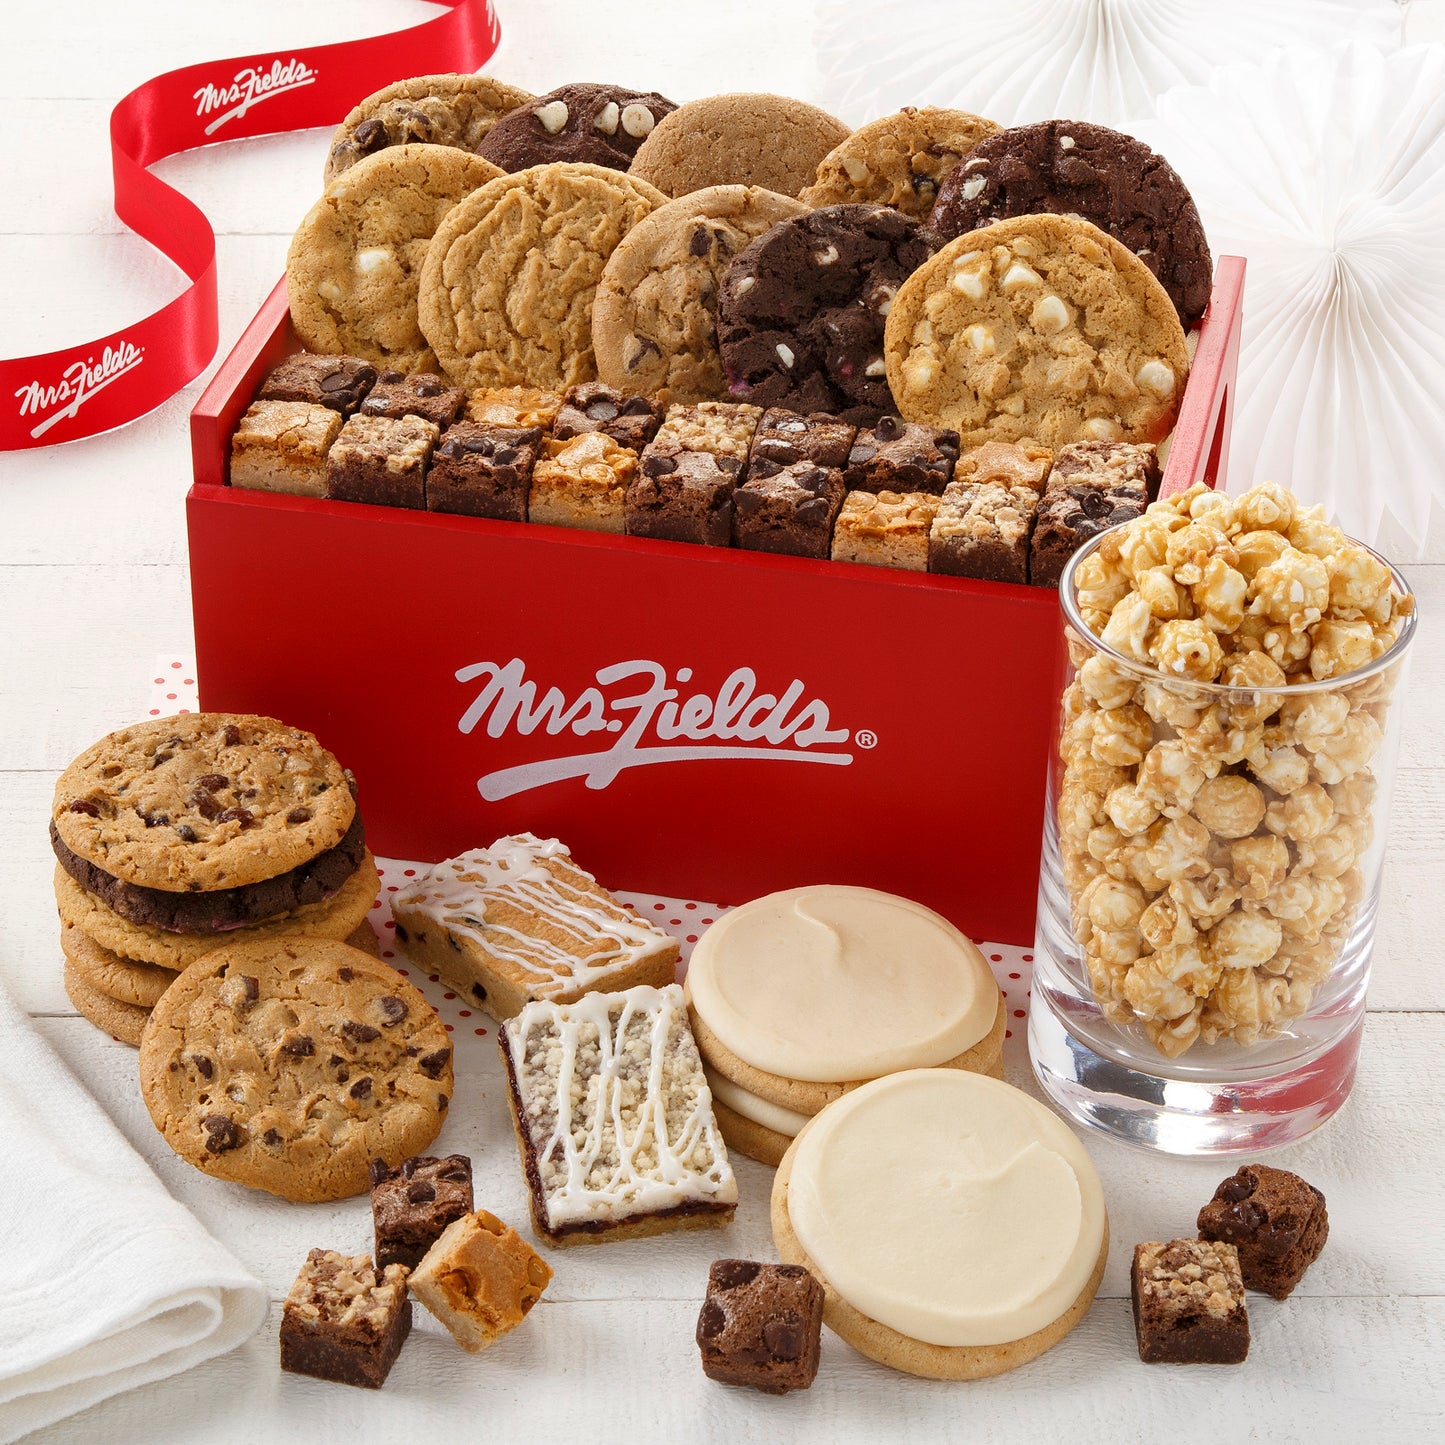 A red signature Mrs. Fields wooden crate filled with an assortment of original cookies, brownie bites, fruit bars, and popcorn